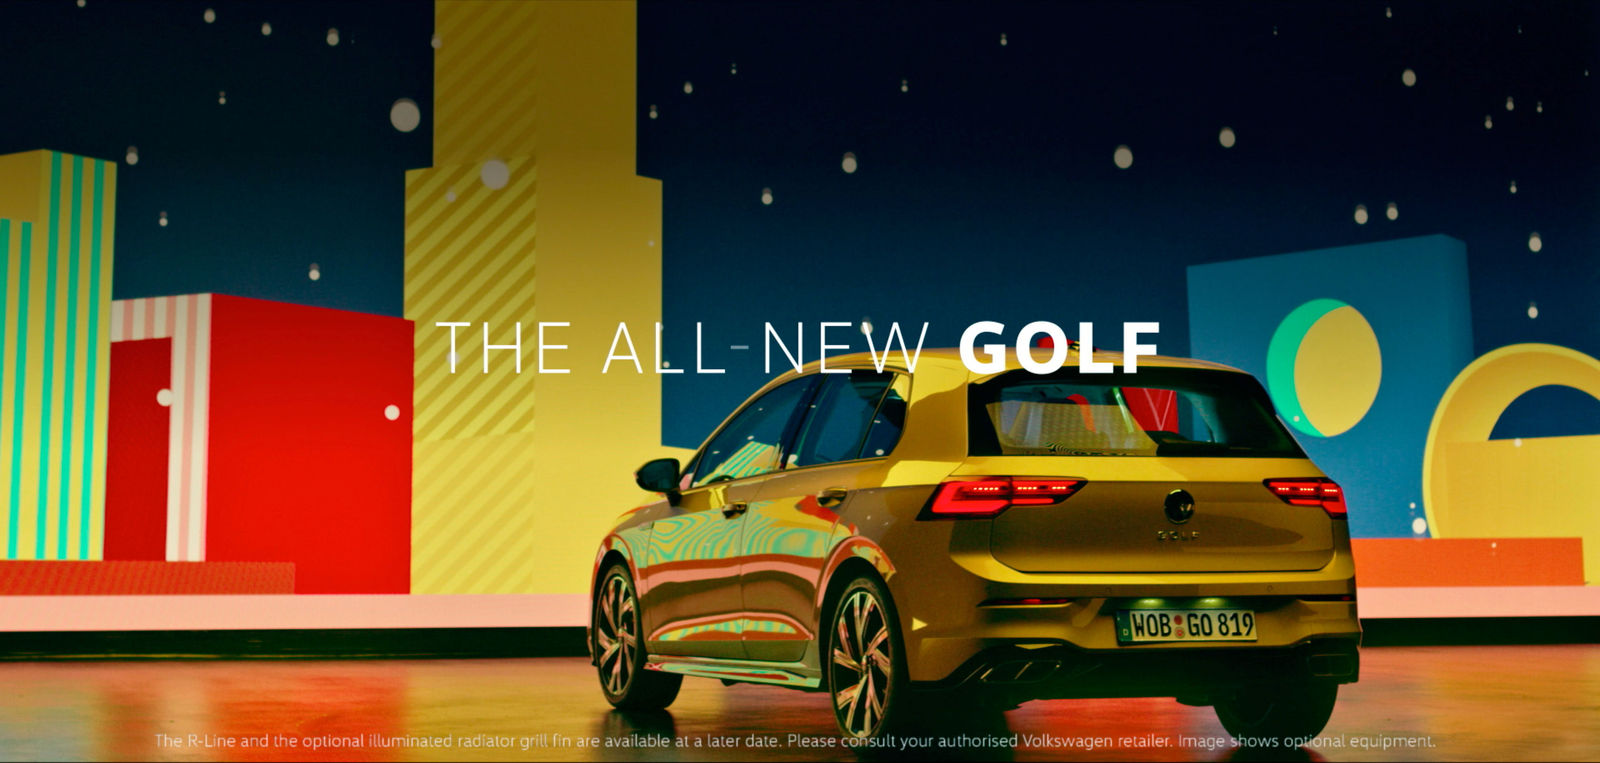 ʺLife happens with a Golfʺ: New Volkswagen marketing campaign starts on 6 December